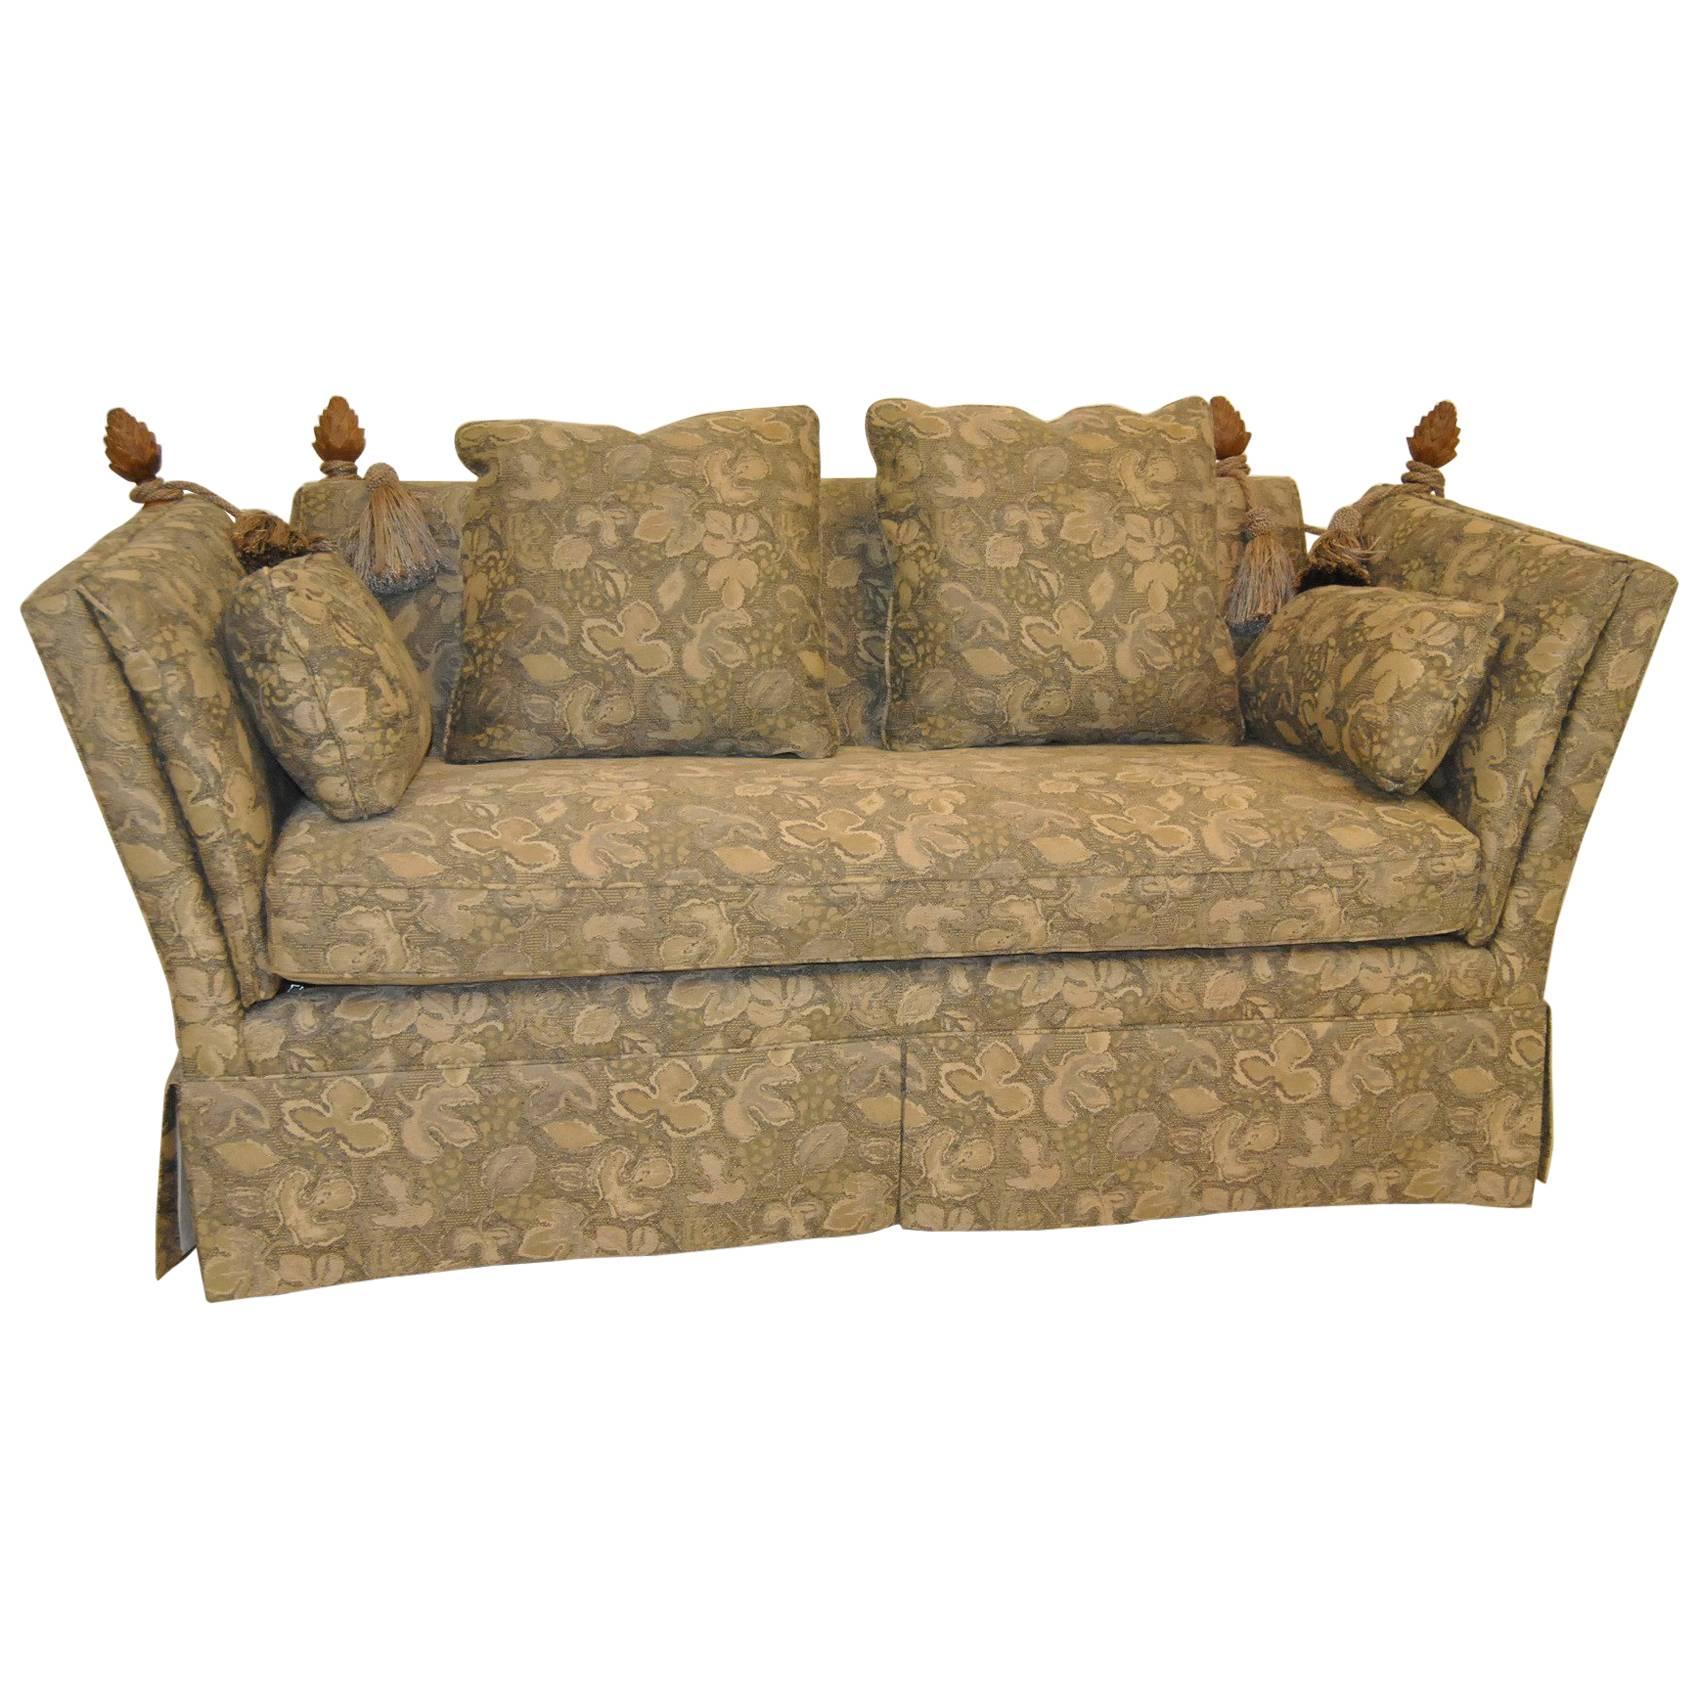 Knole Style Settee Loveseat with Carved Pineapple Finials by Baker Furniture